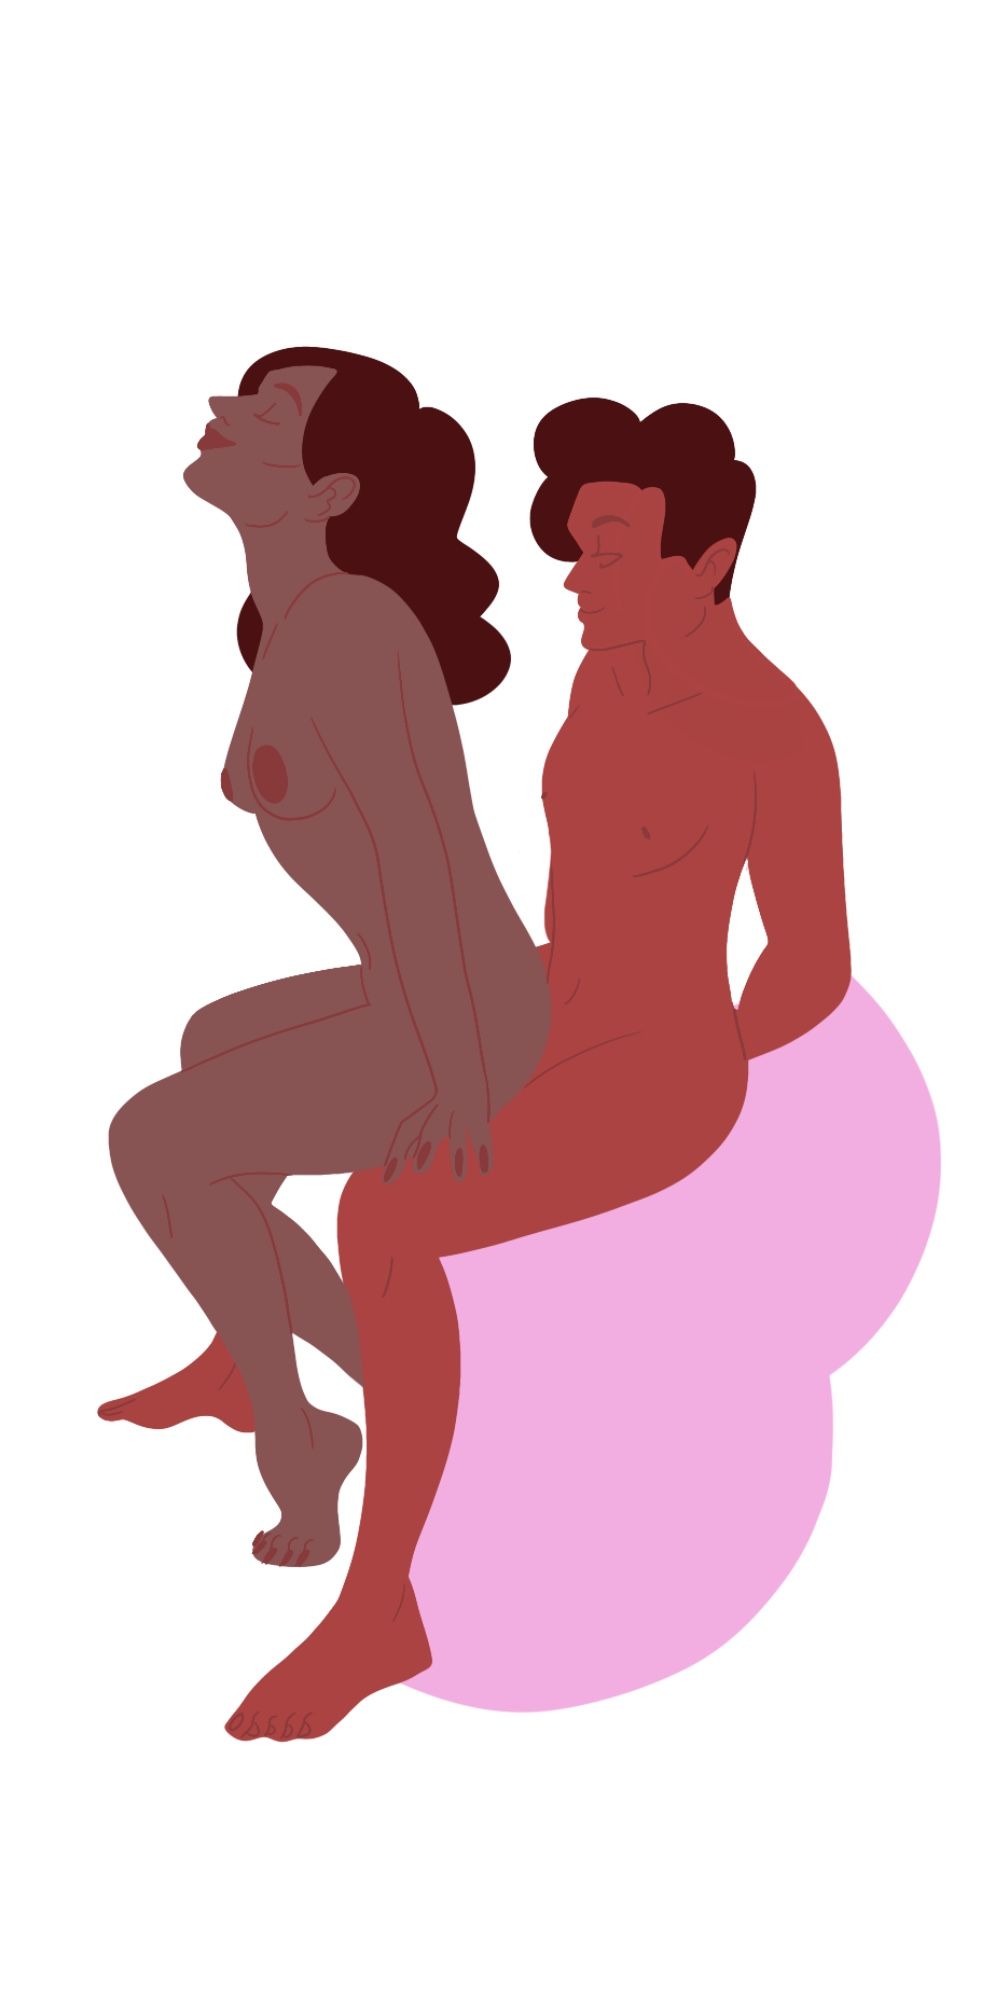 11 Steamy Hotel Sex Positions pic